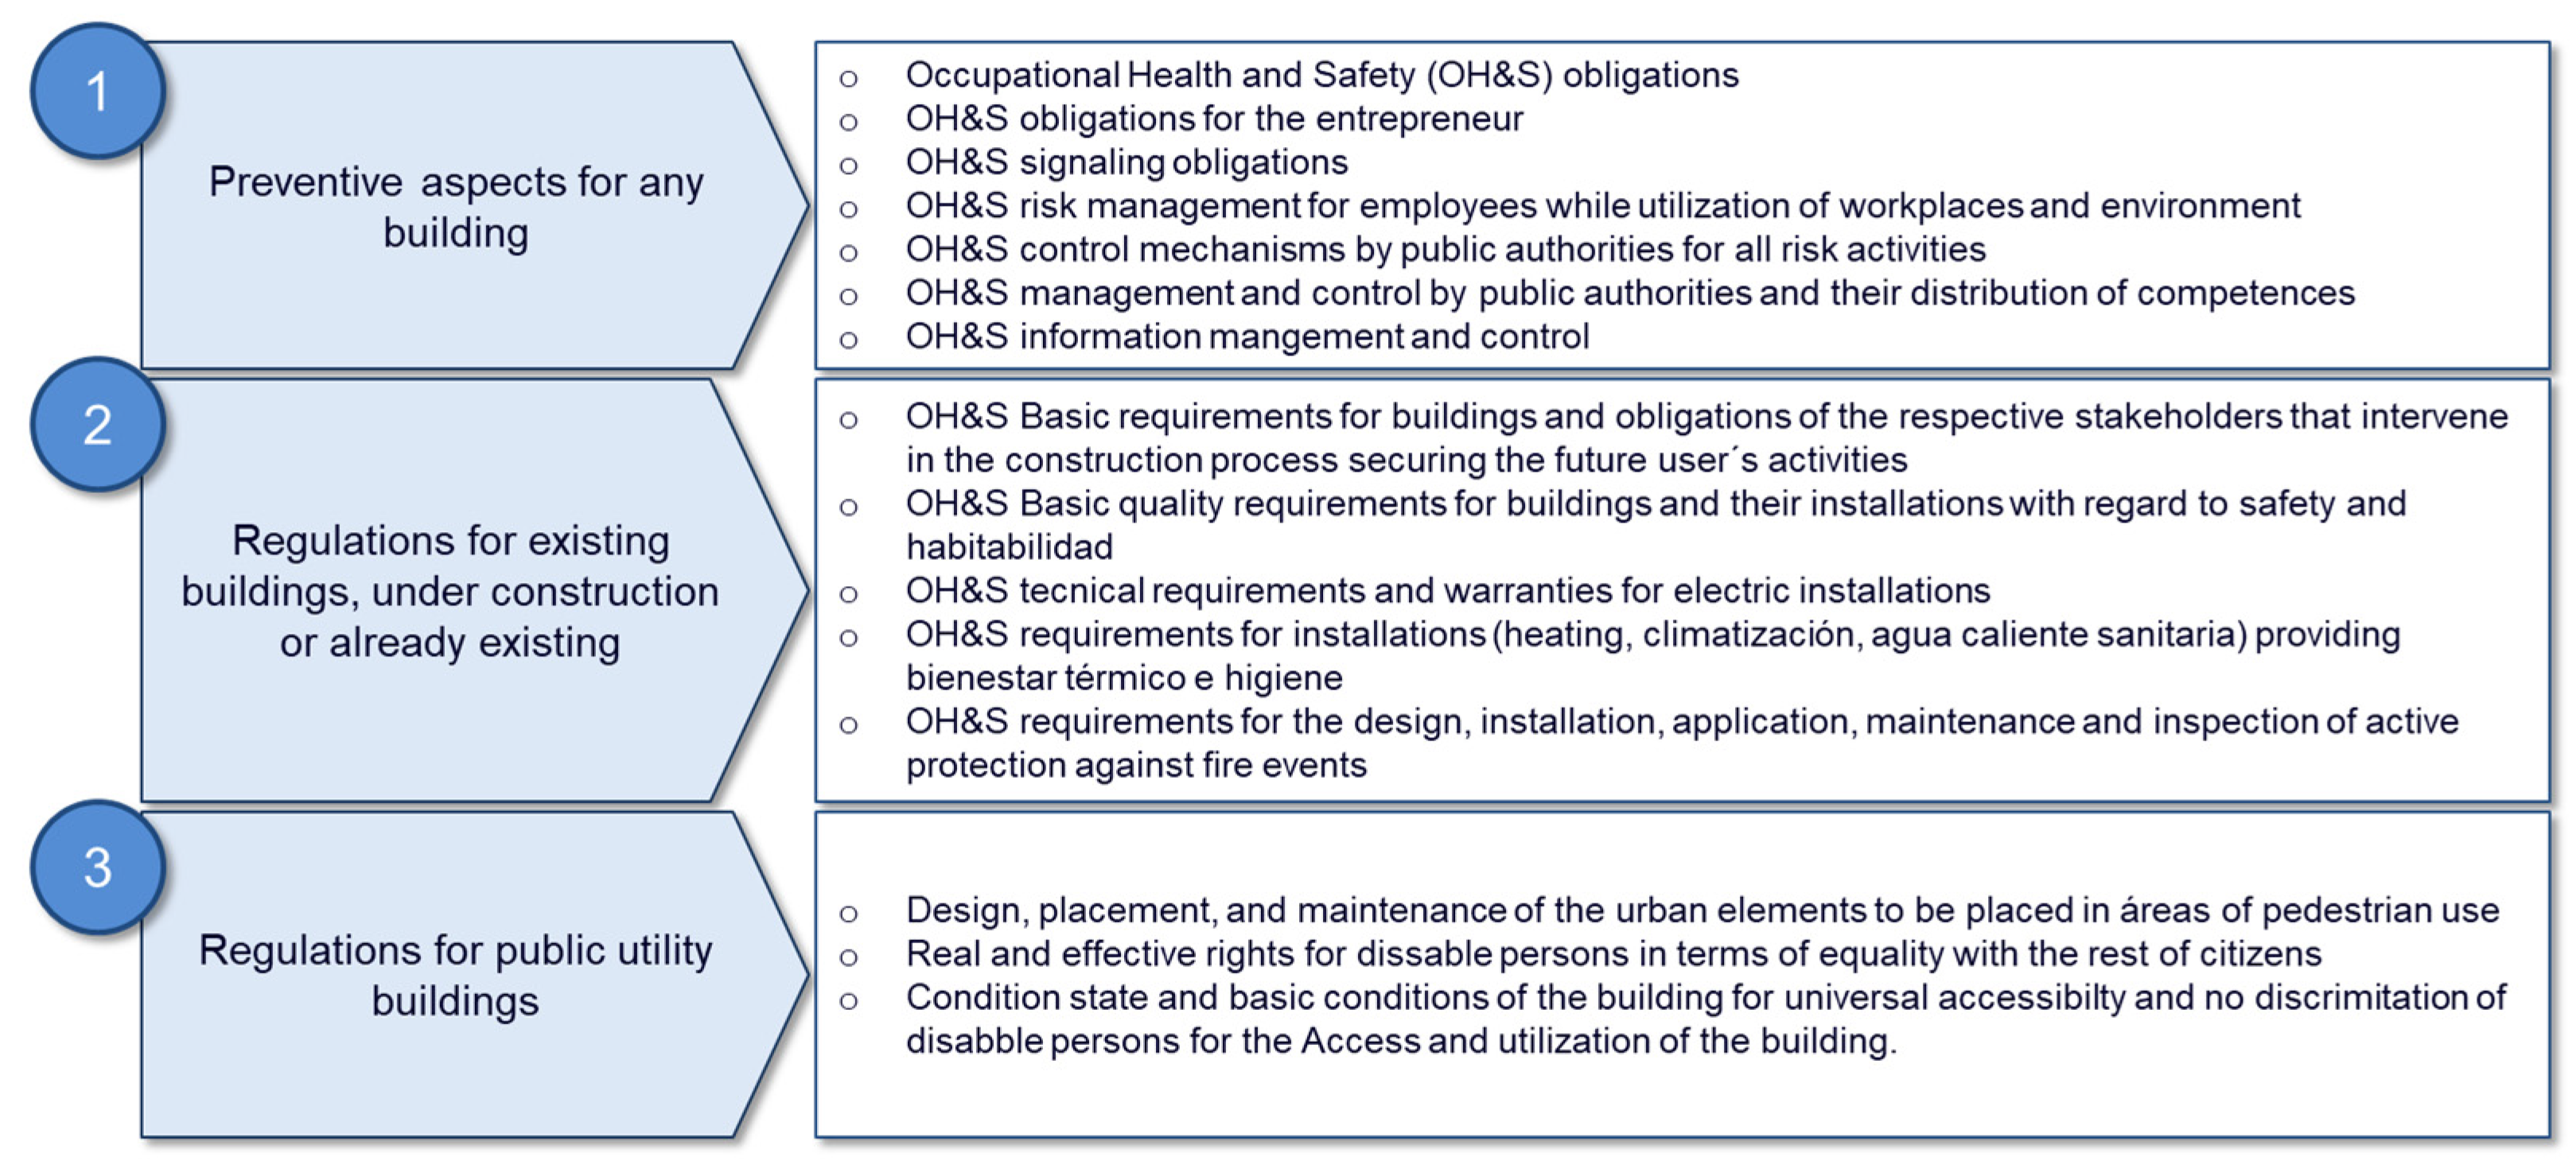 Applied Sciences | Free Full-Text | Project Design and Management of  Optimized Self-Protection Plans: A Case Study for Spanish Public Buildings  | HTML